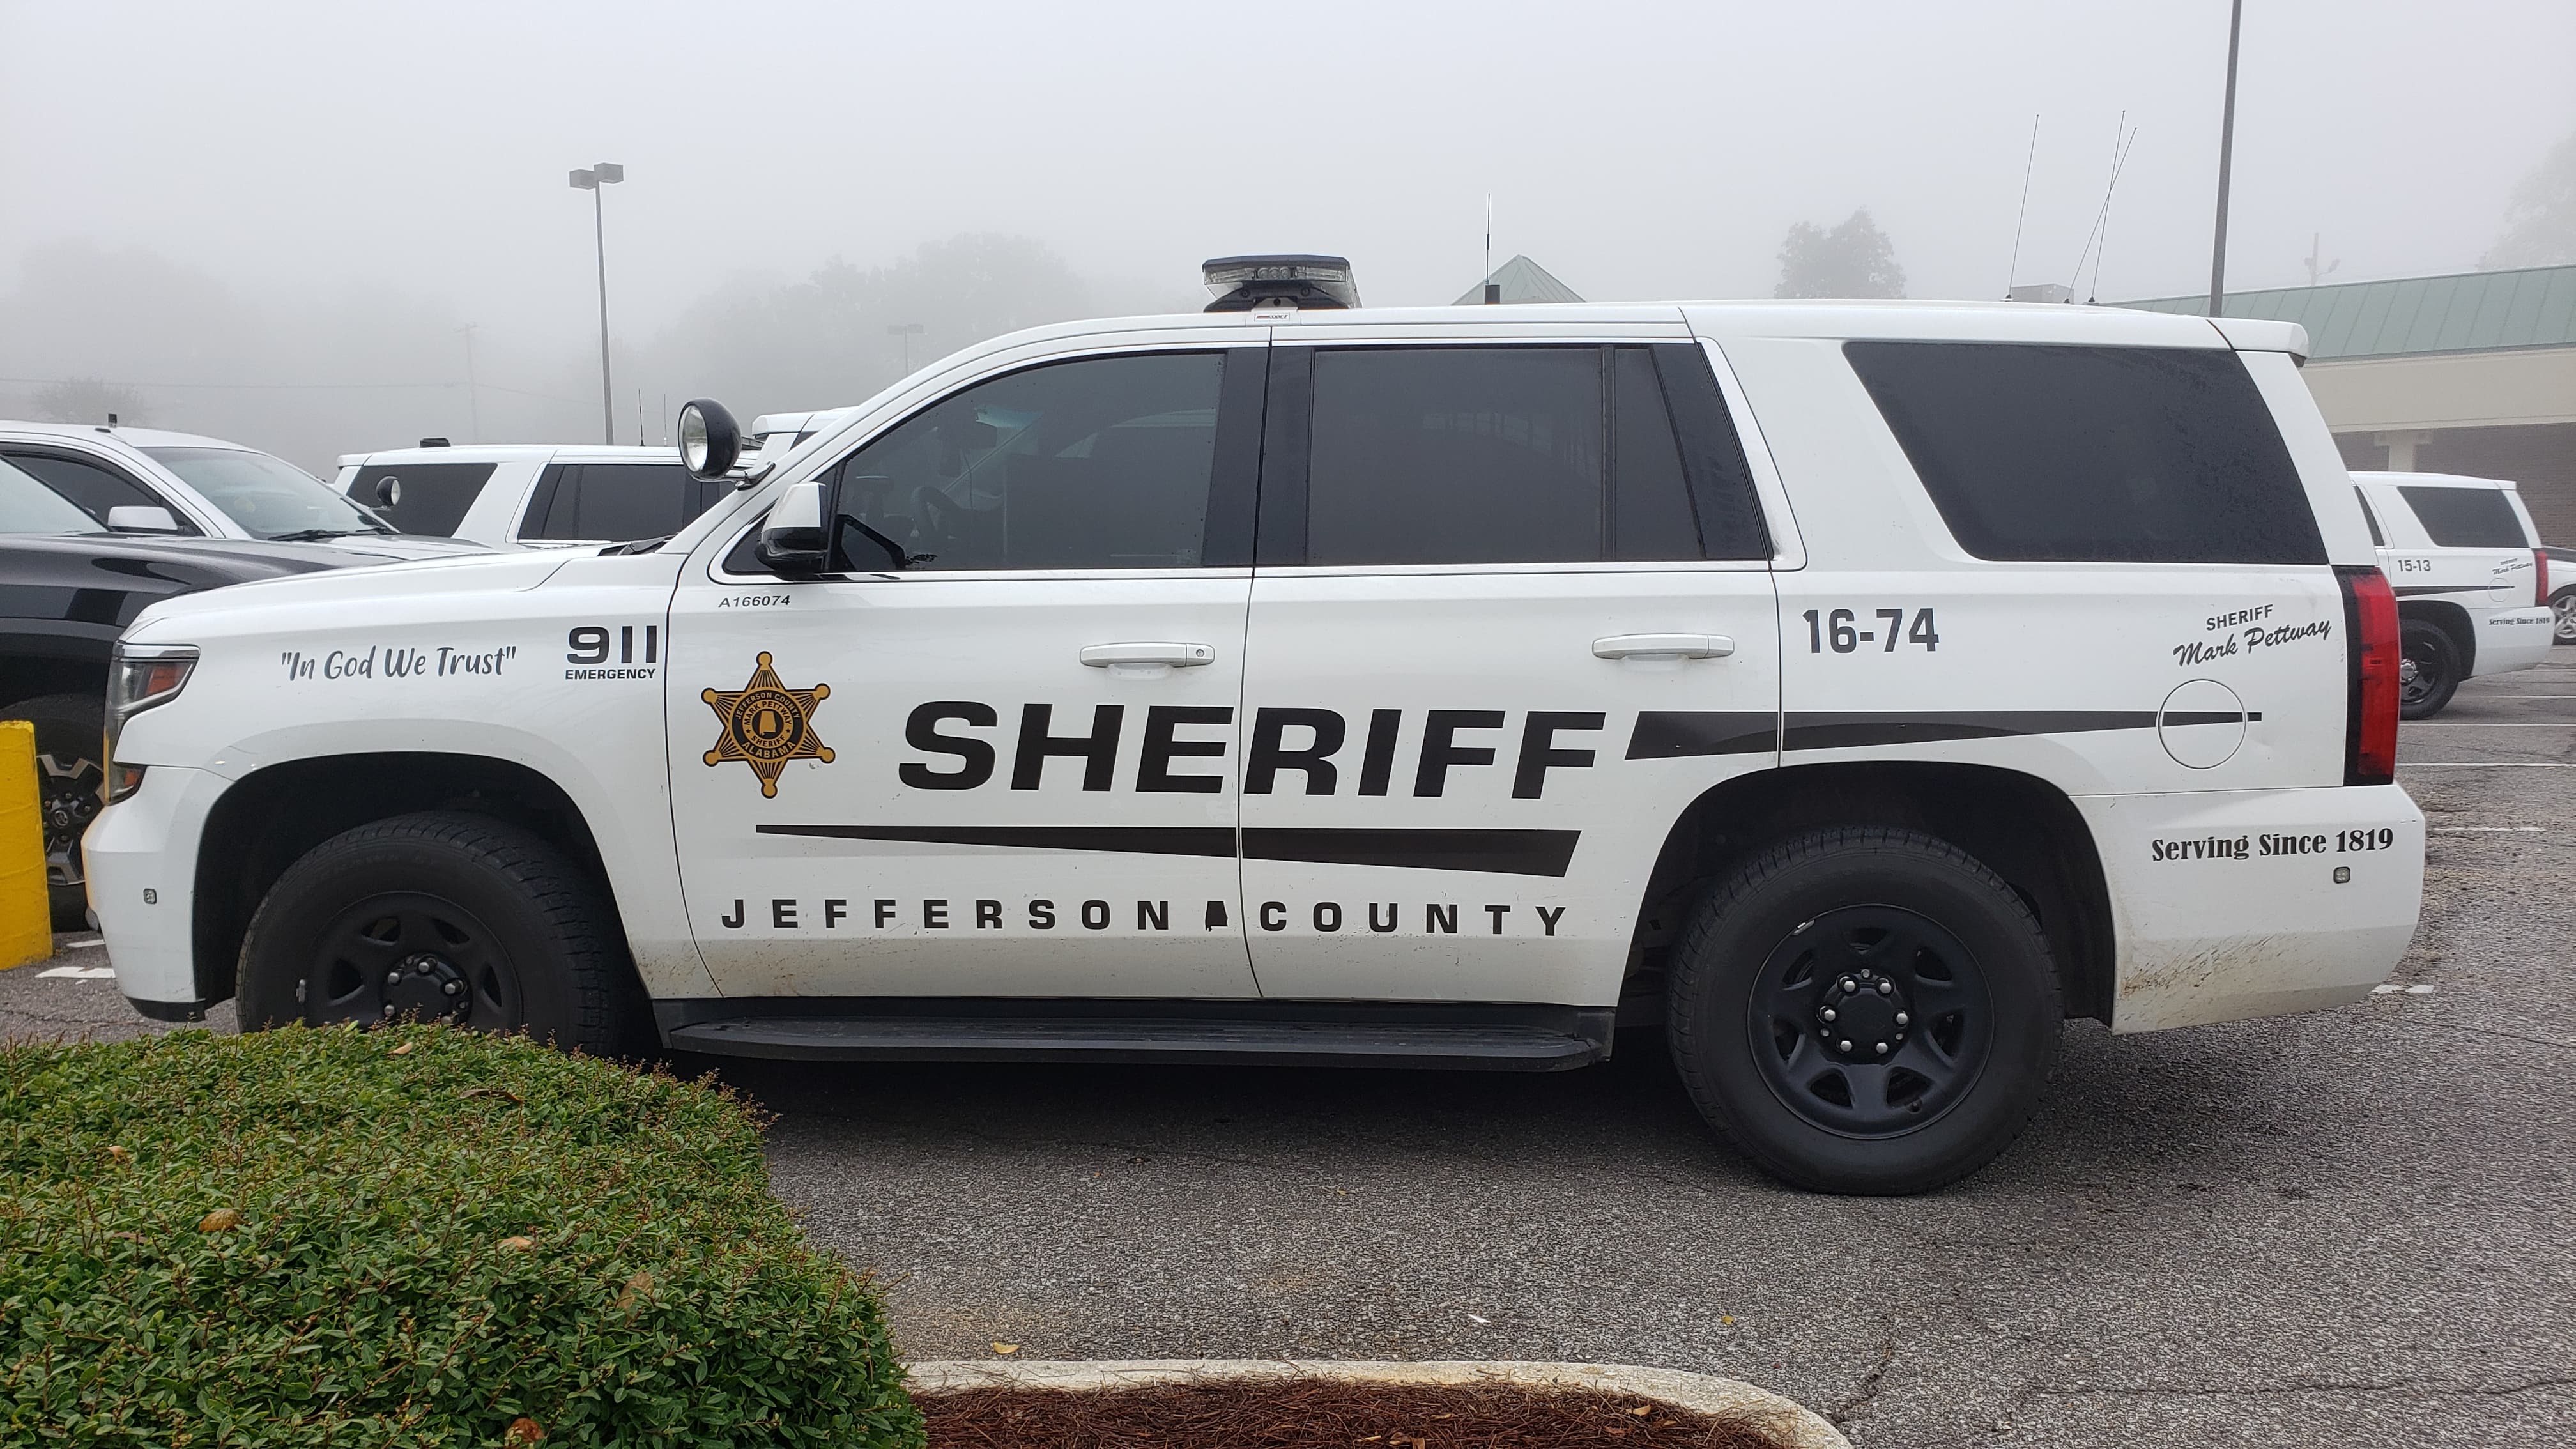 BREAKING: Jefferson County courthouses and facilities to remain closed through April 30